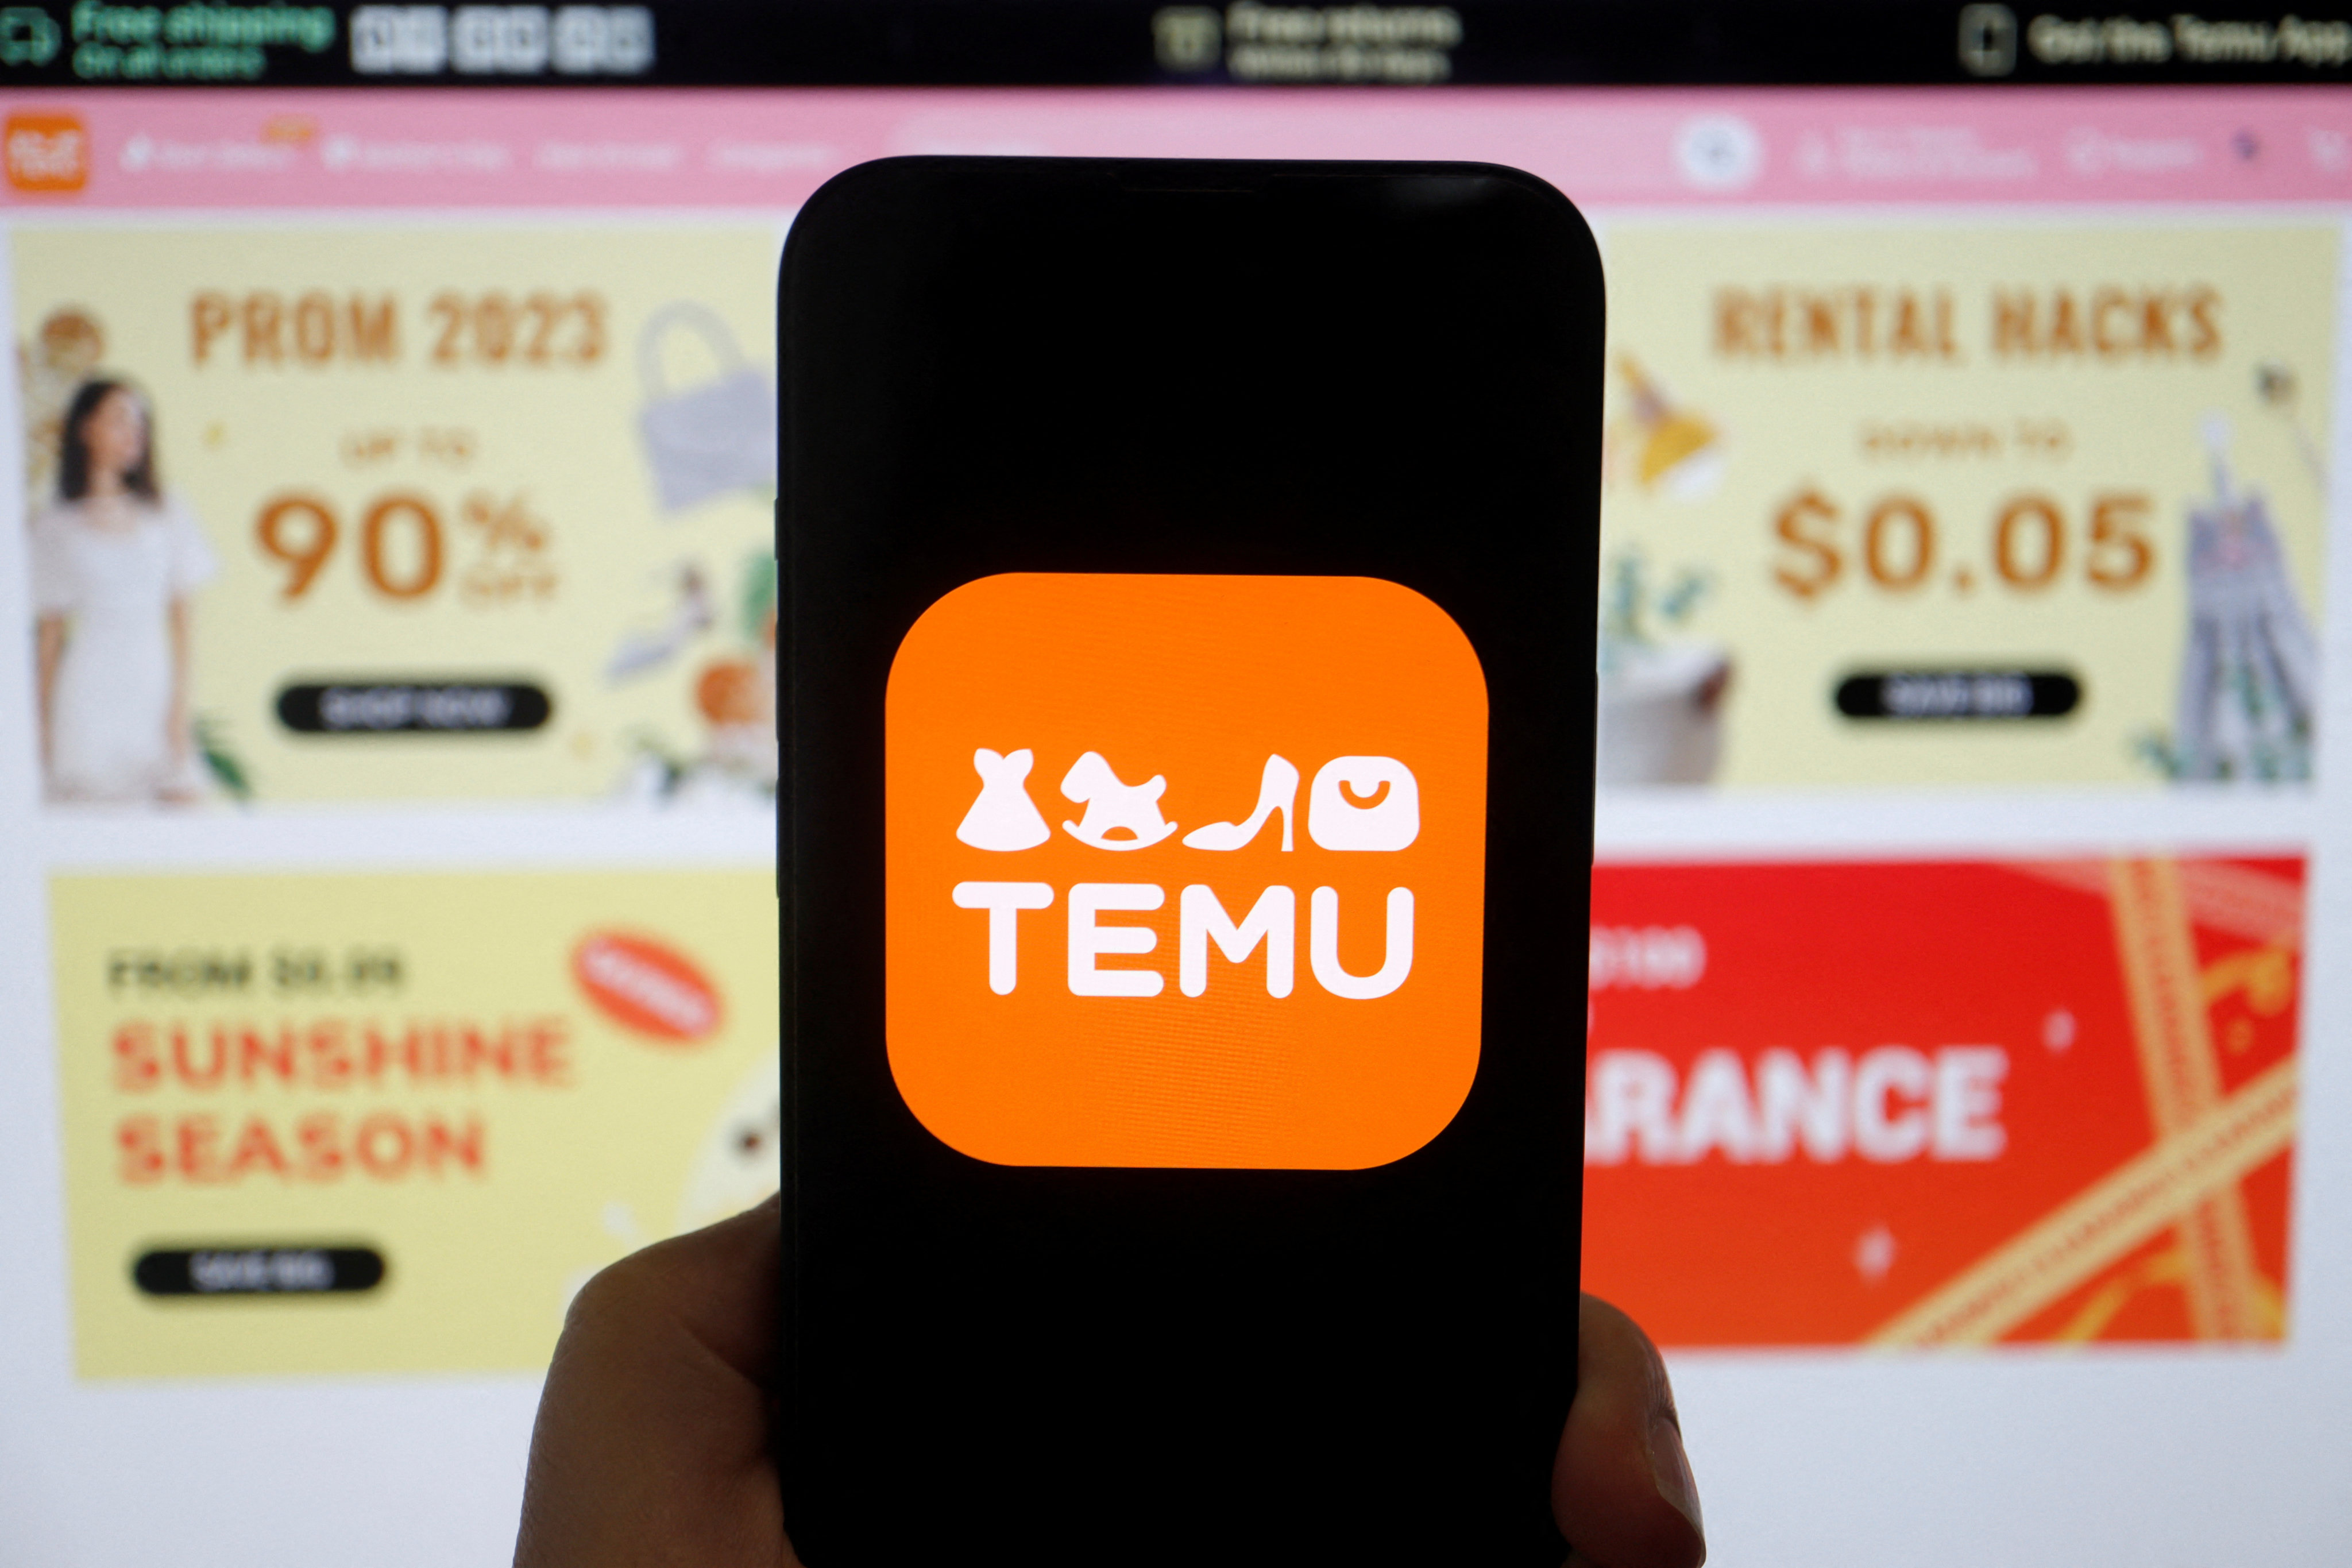 PDD Holdings, owner of Temu and Pinduoduo, has changed its principal executive offices to an address in Dublin from Shanghai in filings to the US Securities Exchange Commission. Photo: Reuters